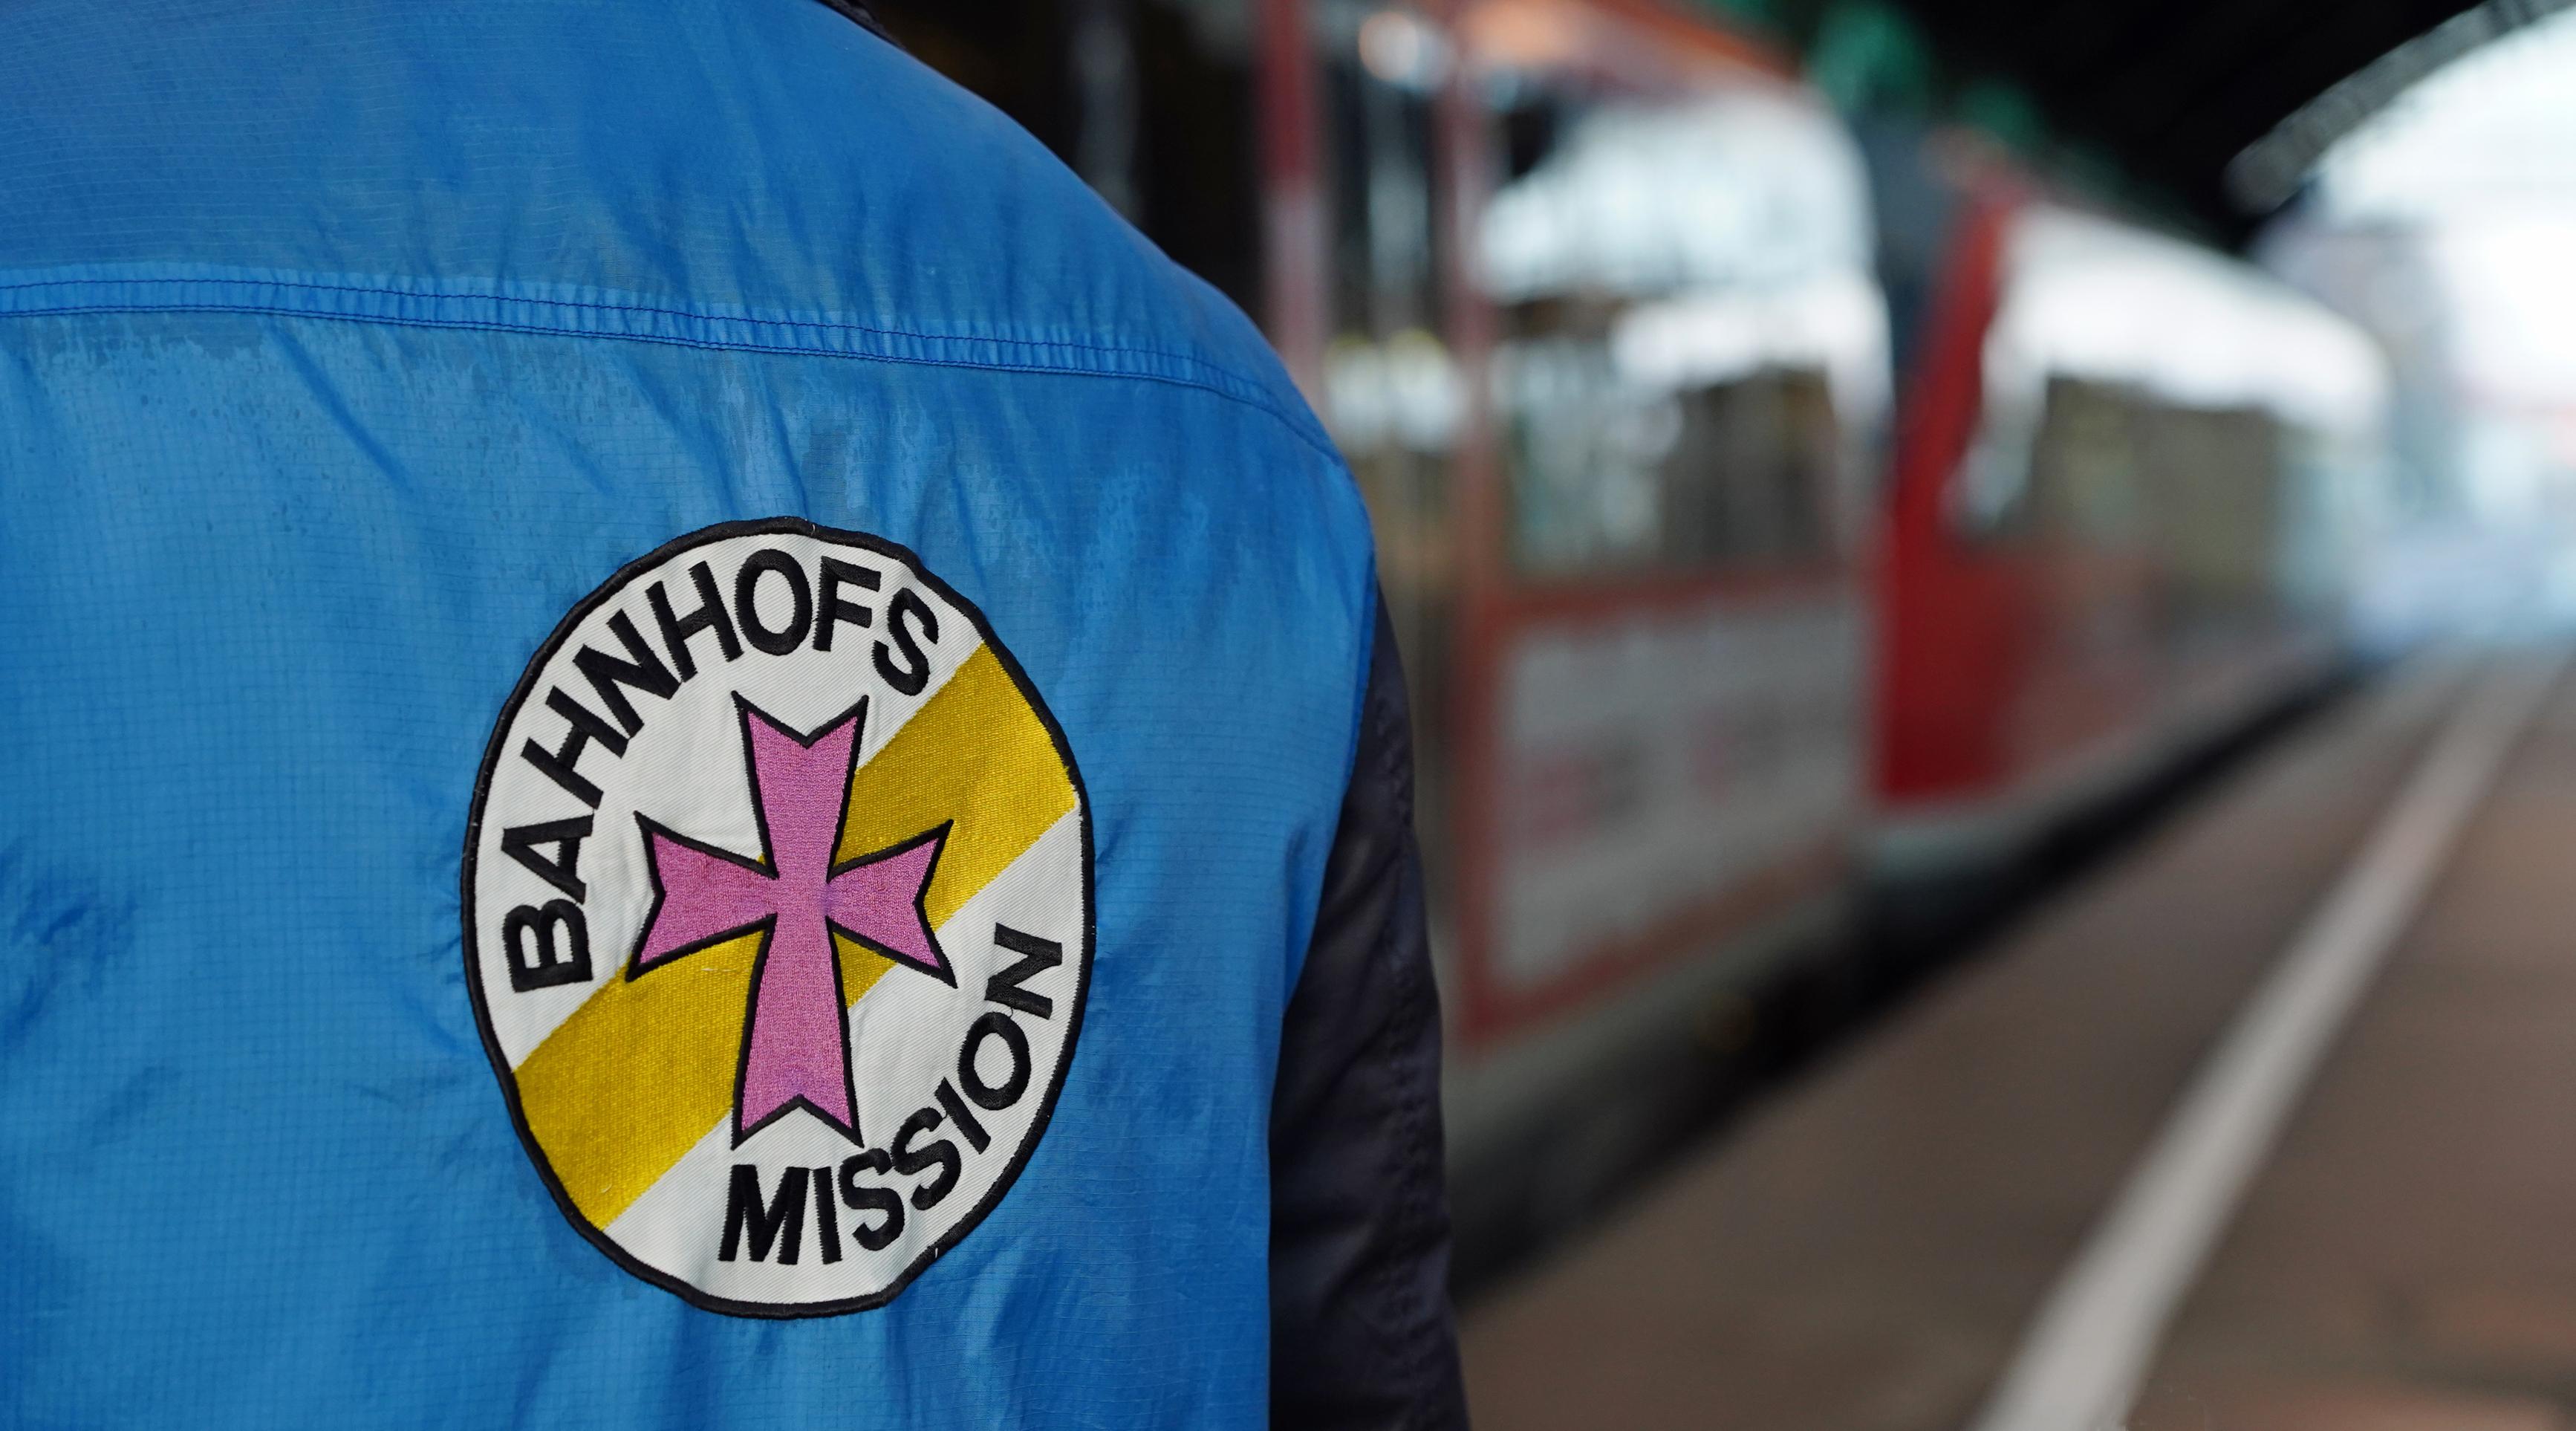 A person on the platform wears a vest with the logo of Bahnhofsmission on the back.